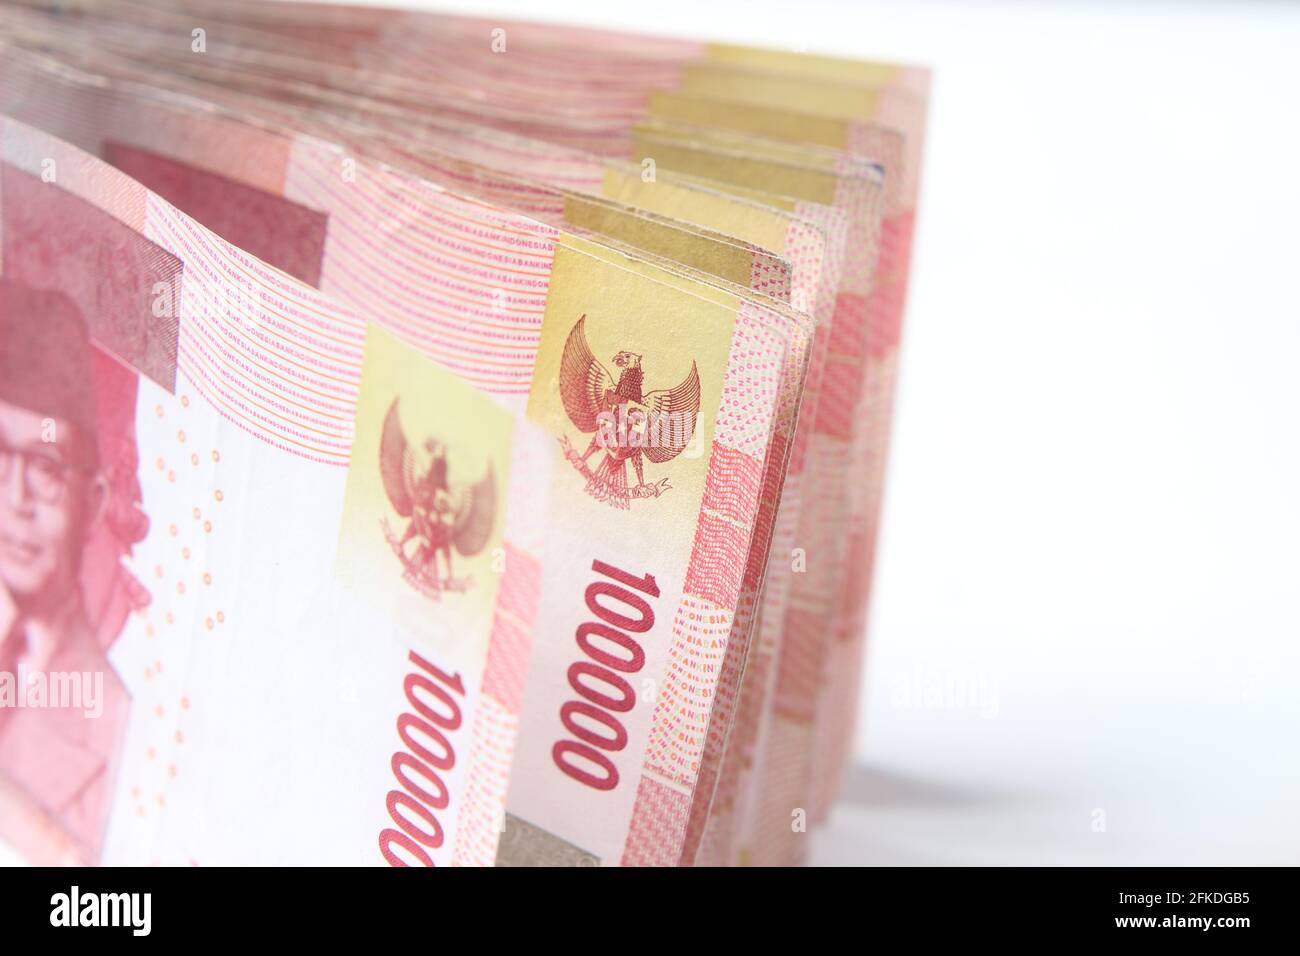 Photo Rupiah Paper Money, Close Up of 100000 at White Background Stock Photo